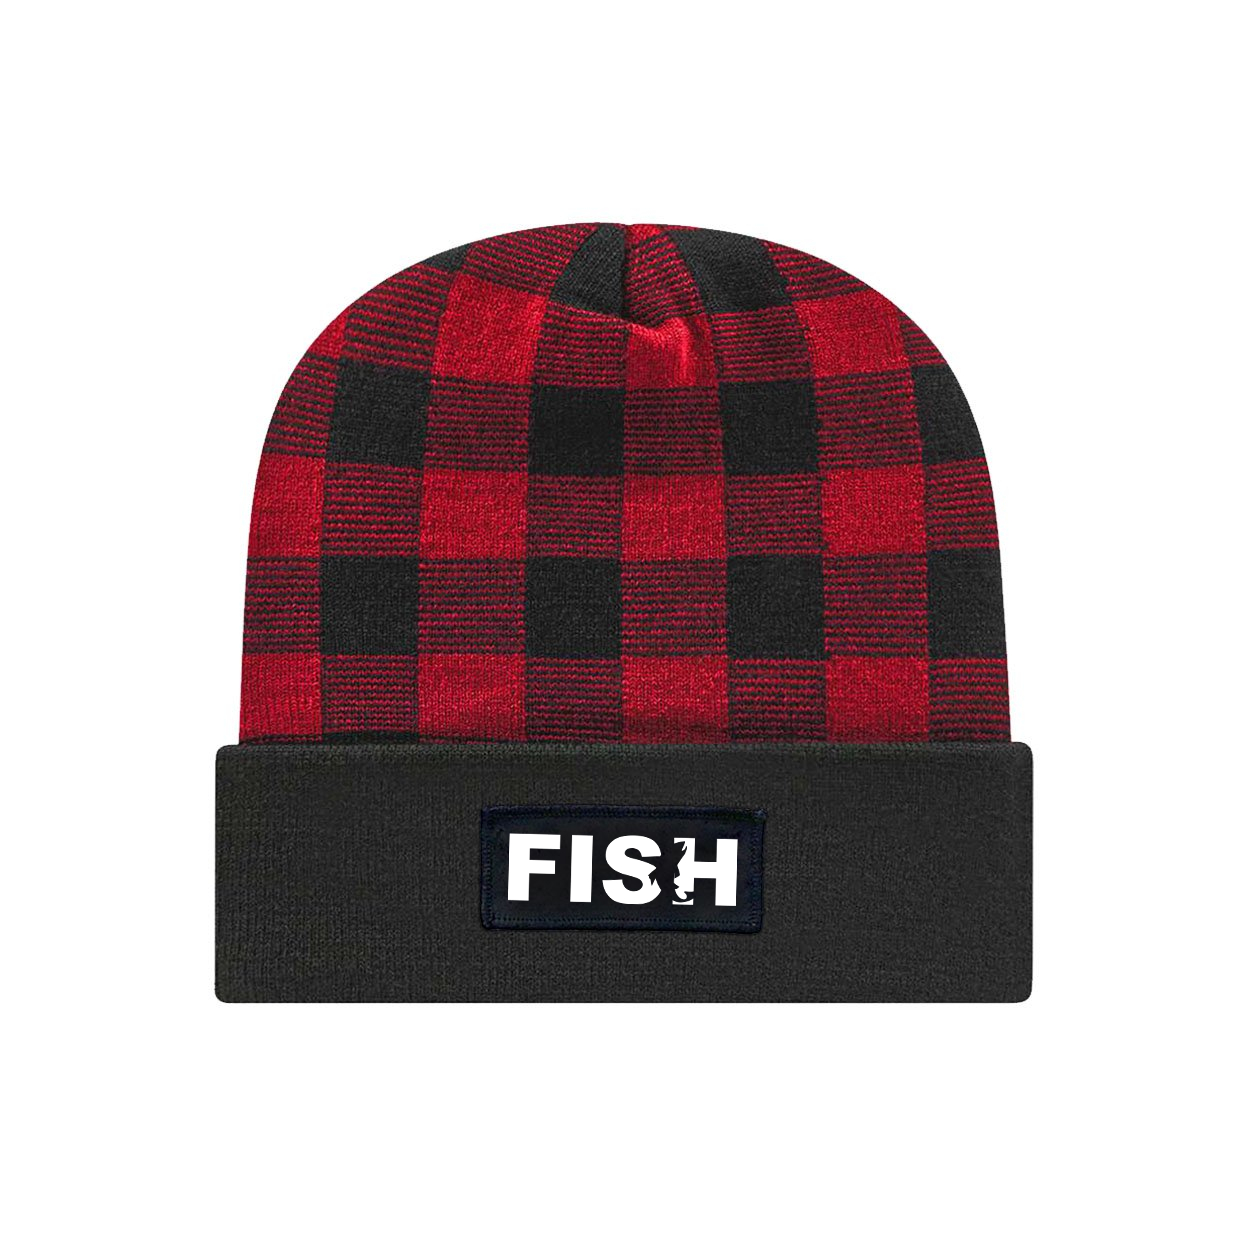 Fish Catch Logo Night Out Woven Patch Roll Up Plaid Beanie Black/True Red (White Logo)